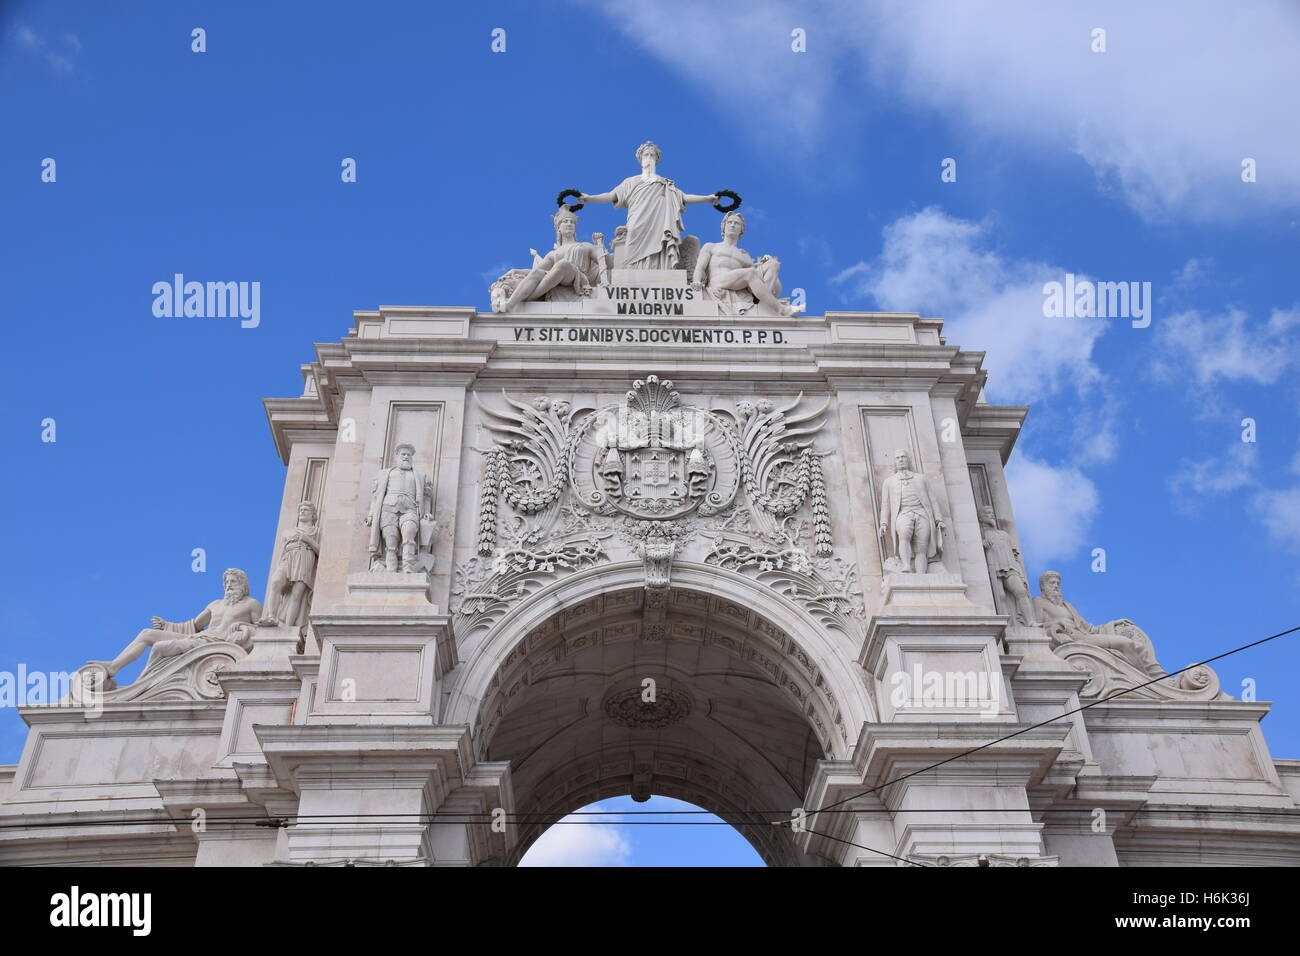 Commerce Square archway, Lisbon, Portugal Stock Photo